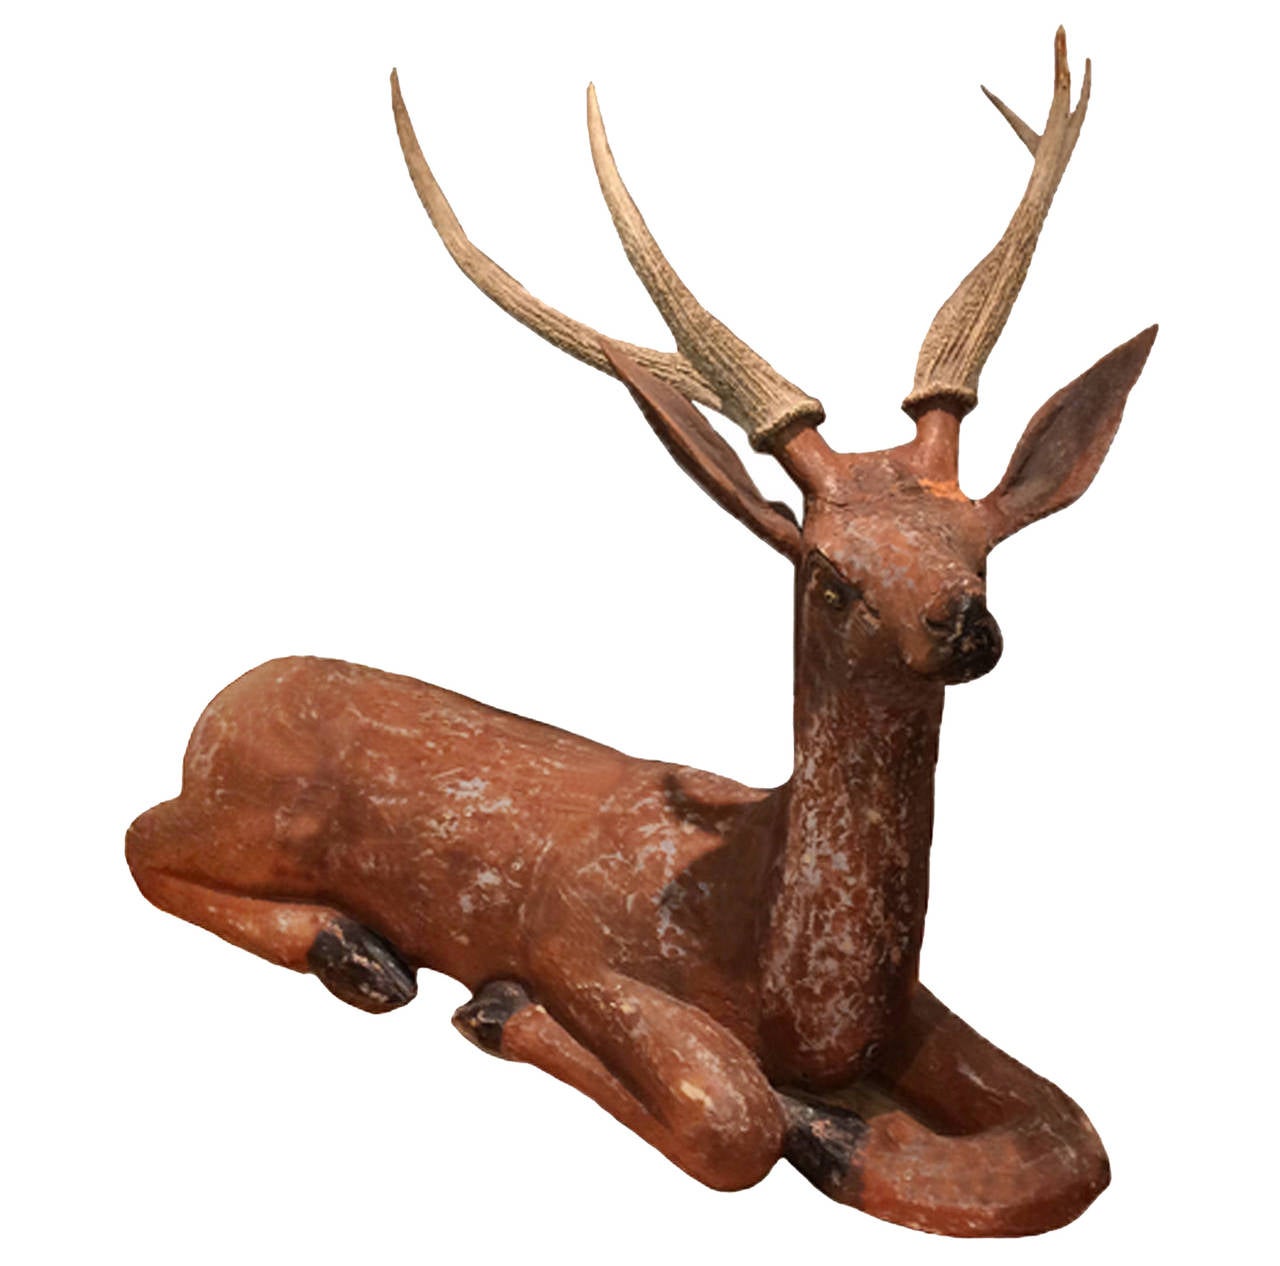 Pair of life-size French reclining deer; original paint; real antlers; circa 1880. Beautiful patina and carving. Such majesty and pure serenity!   Sold as a pair.
45W x 28D x 40H
48W x 28D x 39H